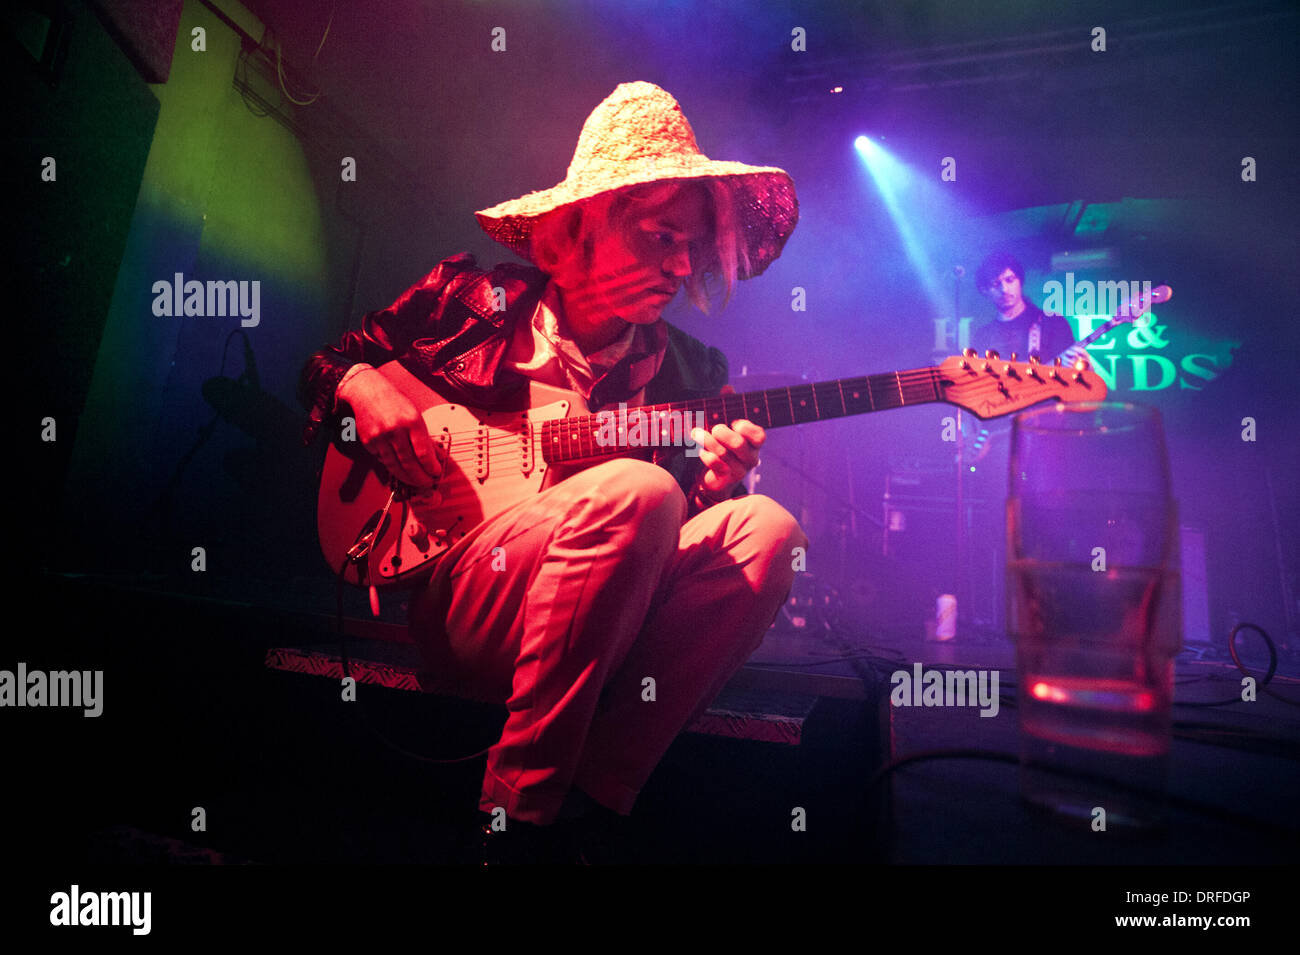 Birmingham, UK. 23rd January 2014. New Zealand indie rock star Connan Mockasin and his band perform a sold out gig at The Hare & Hounds, King's Heath, Birmingham Credit:  John Bentley/Alamy Live News Stock Photo